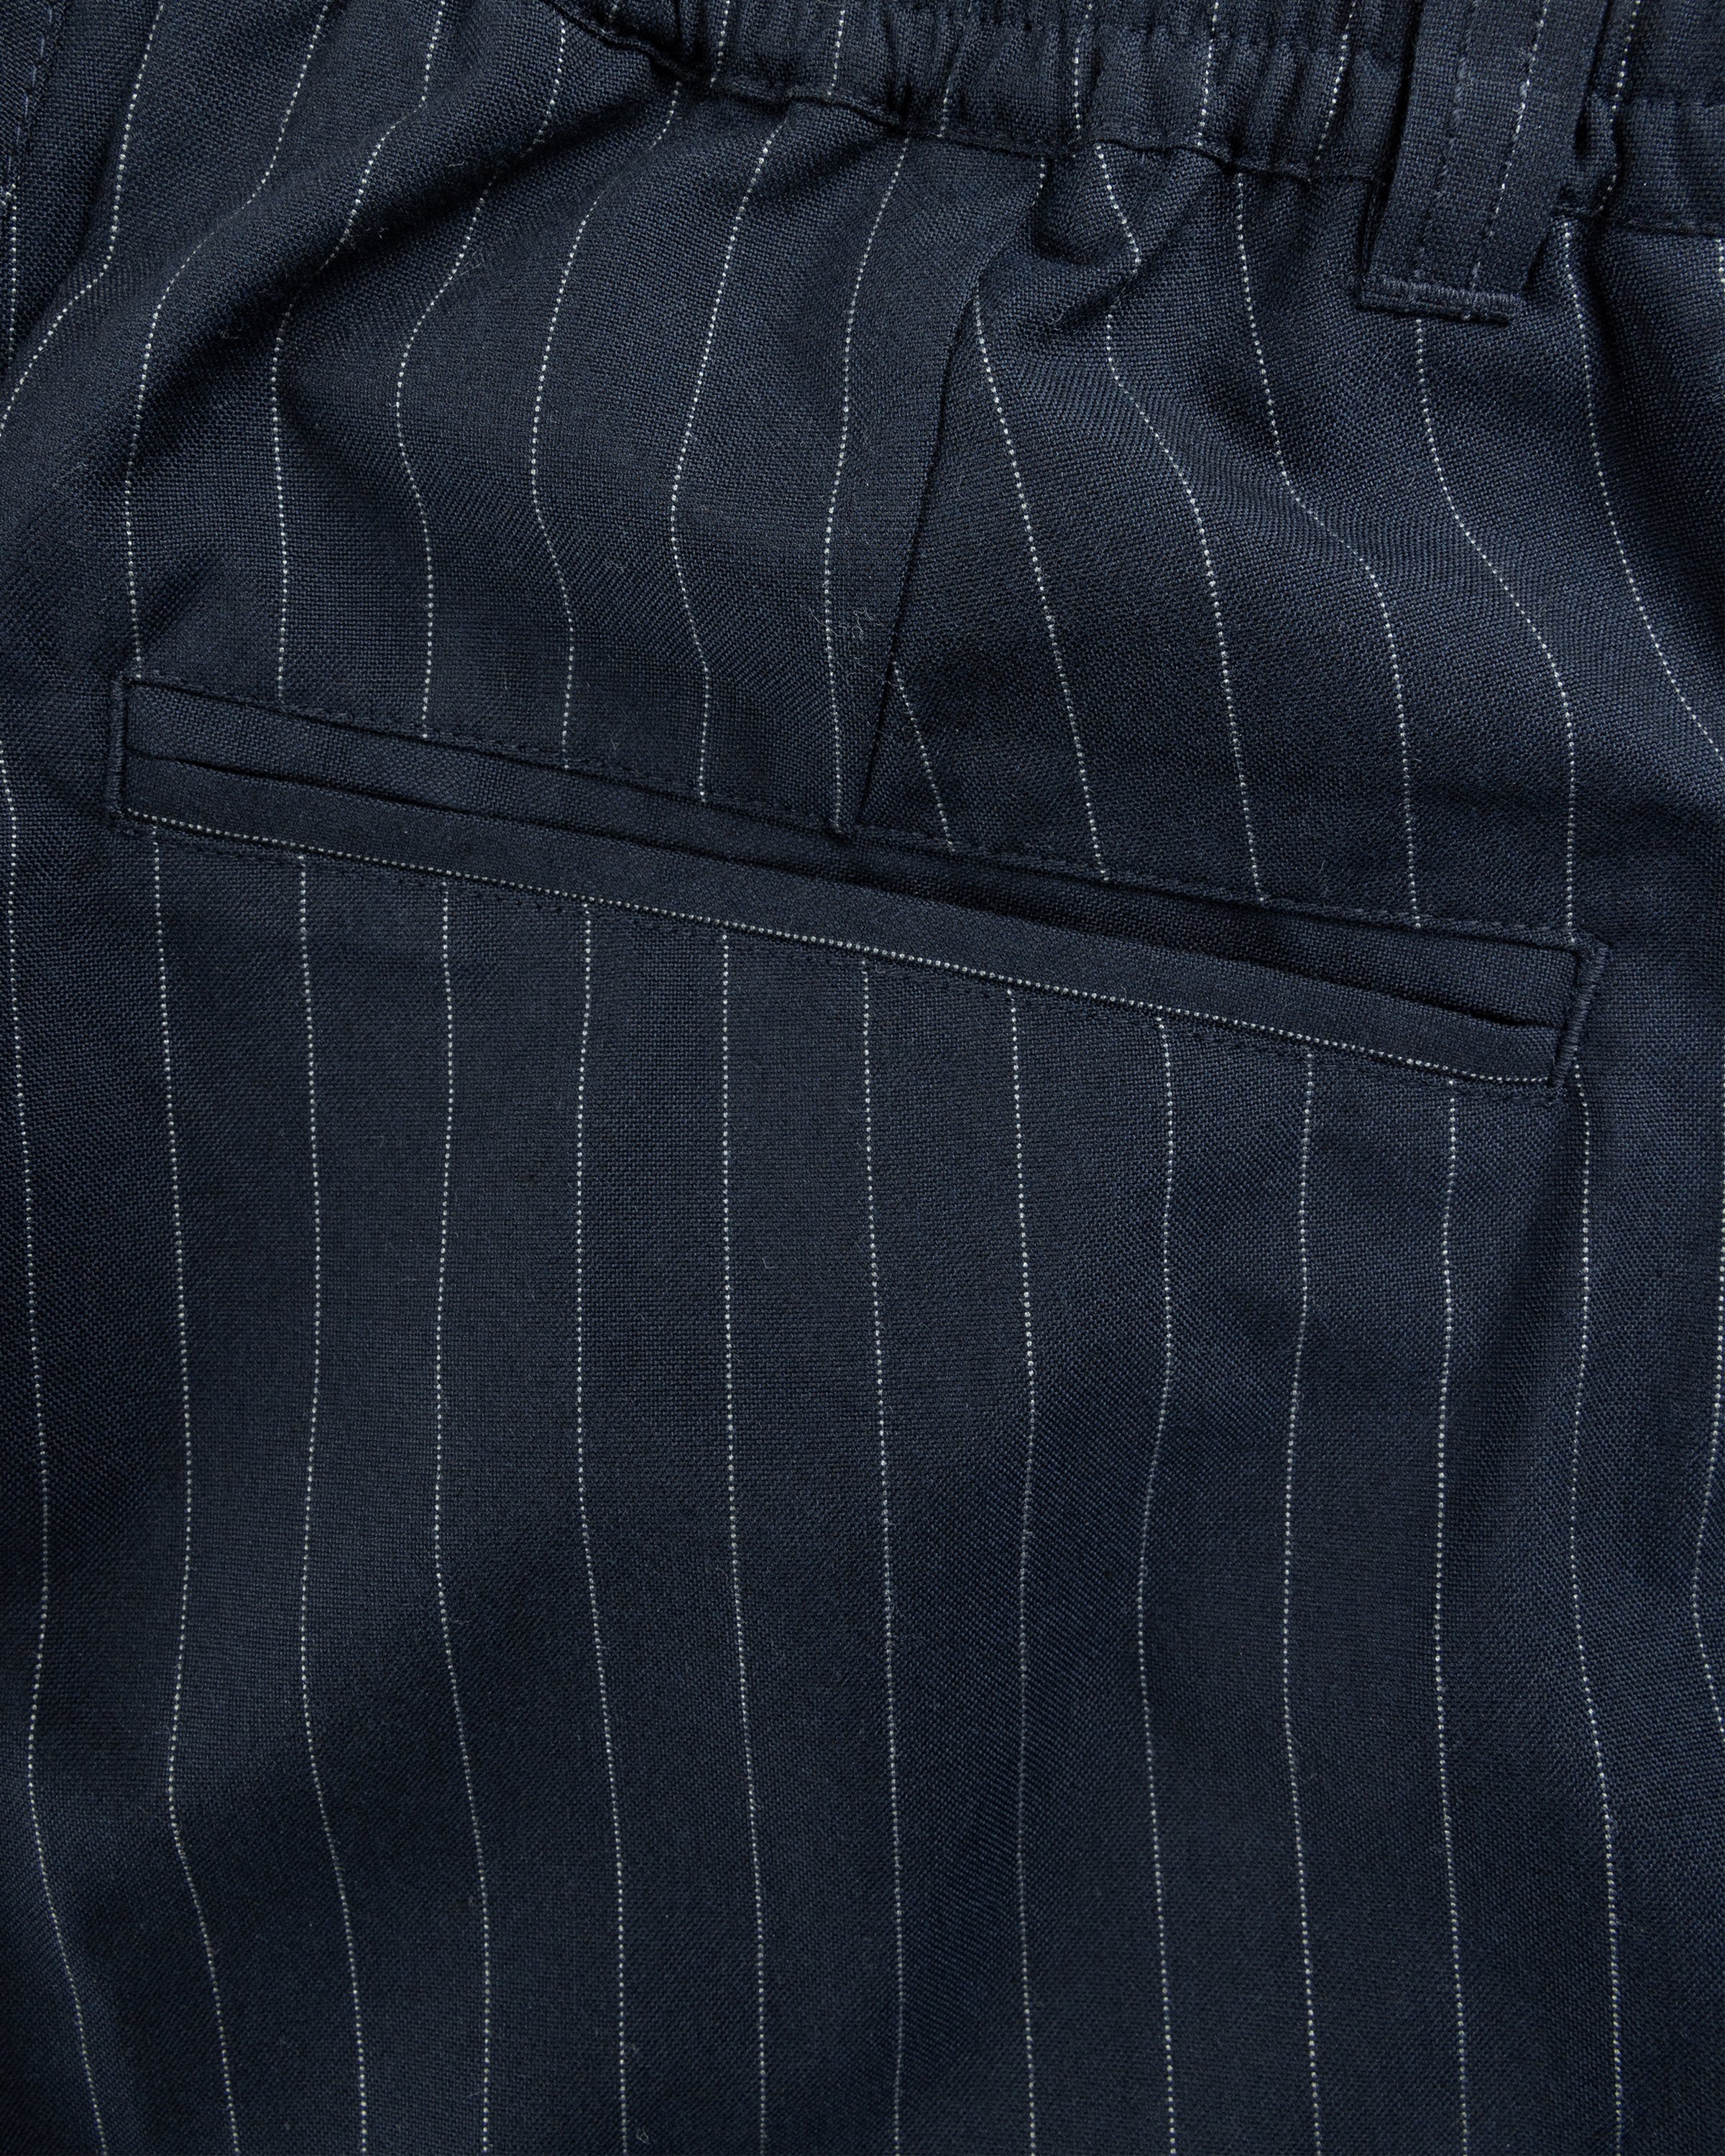 Highsnobiety HS05 - Tropical Suiting Shorts Stripes Navy - Clothing - Stripes Navy - Image 9